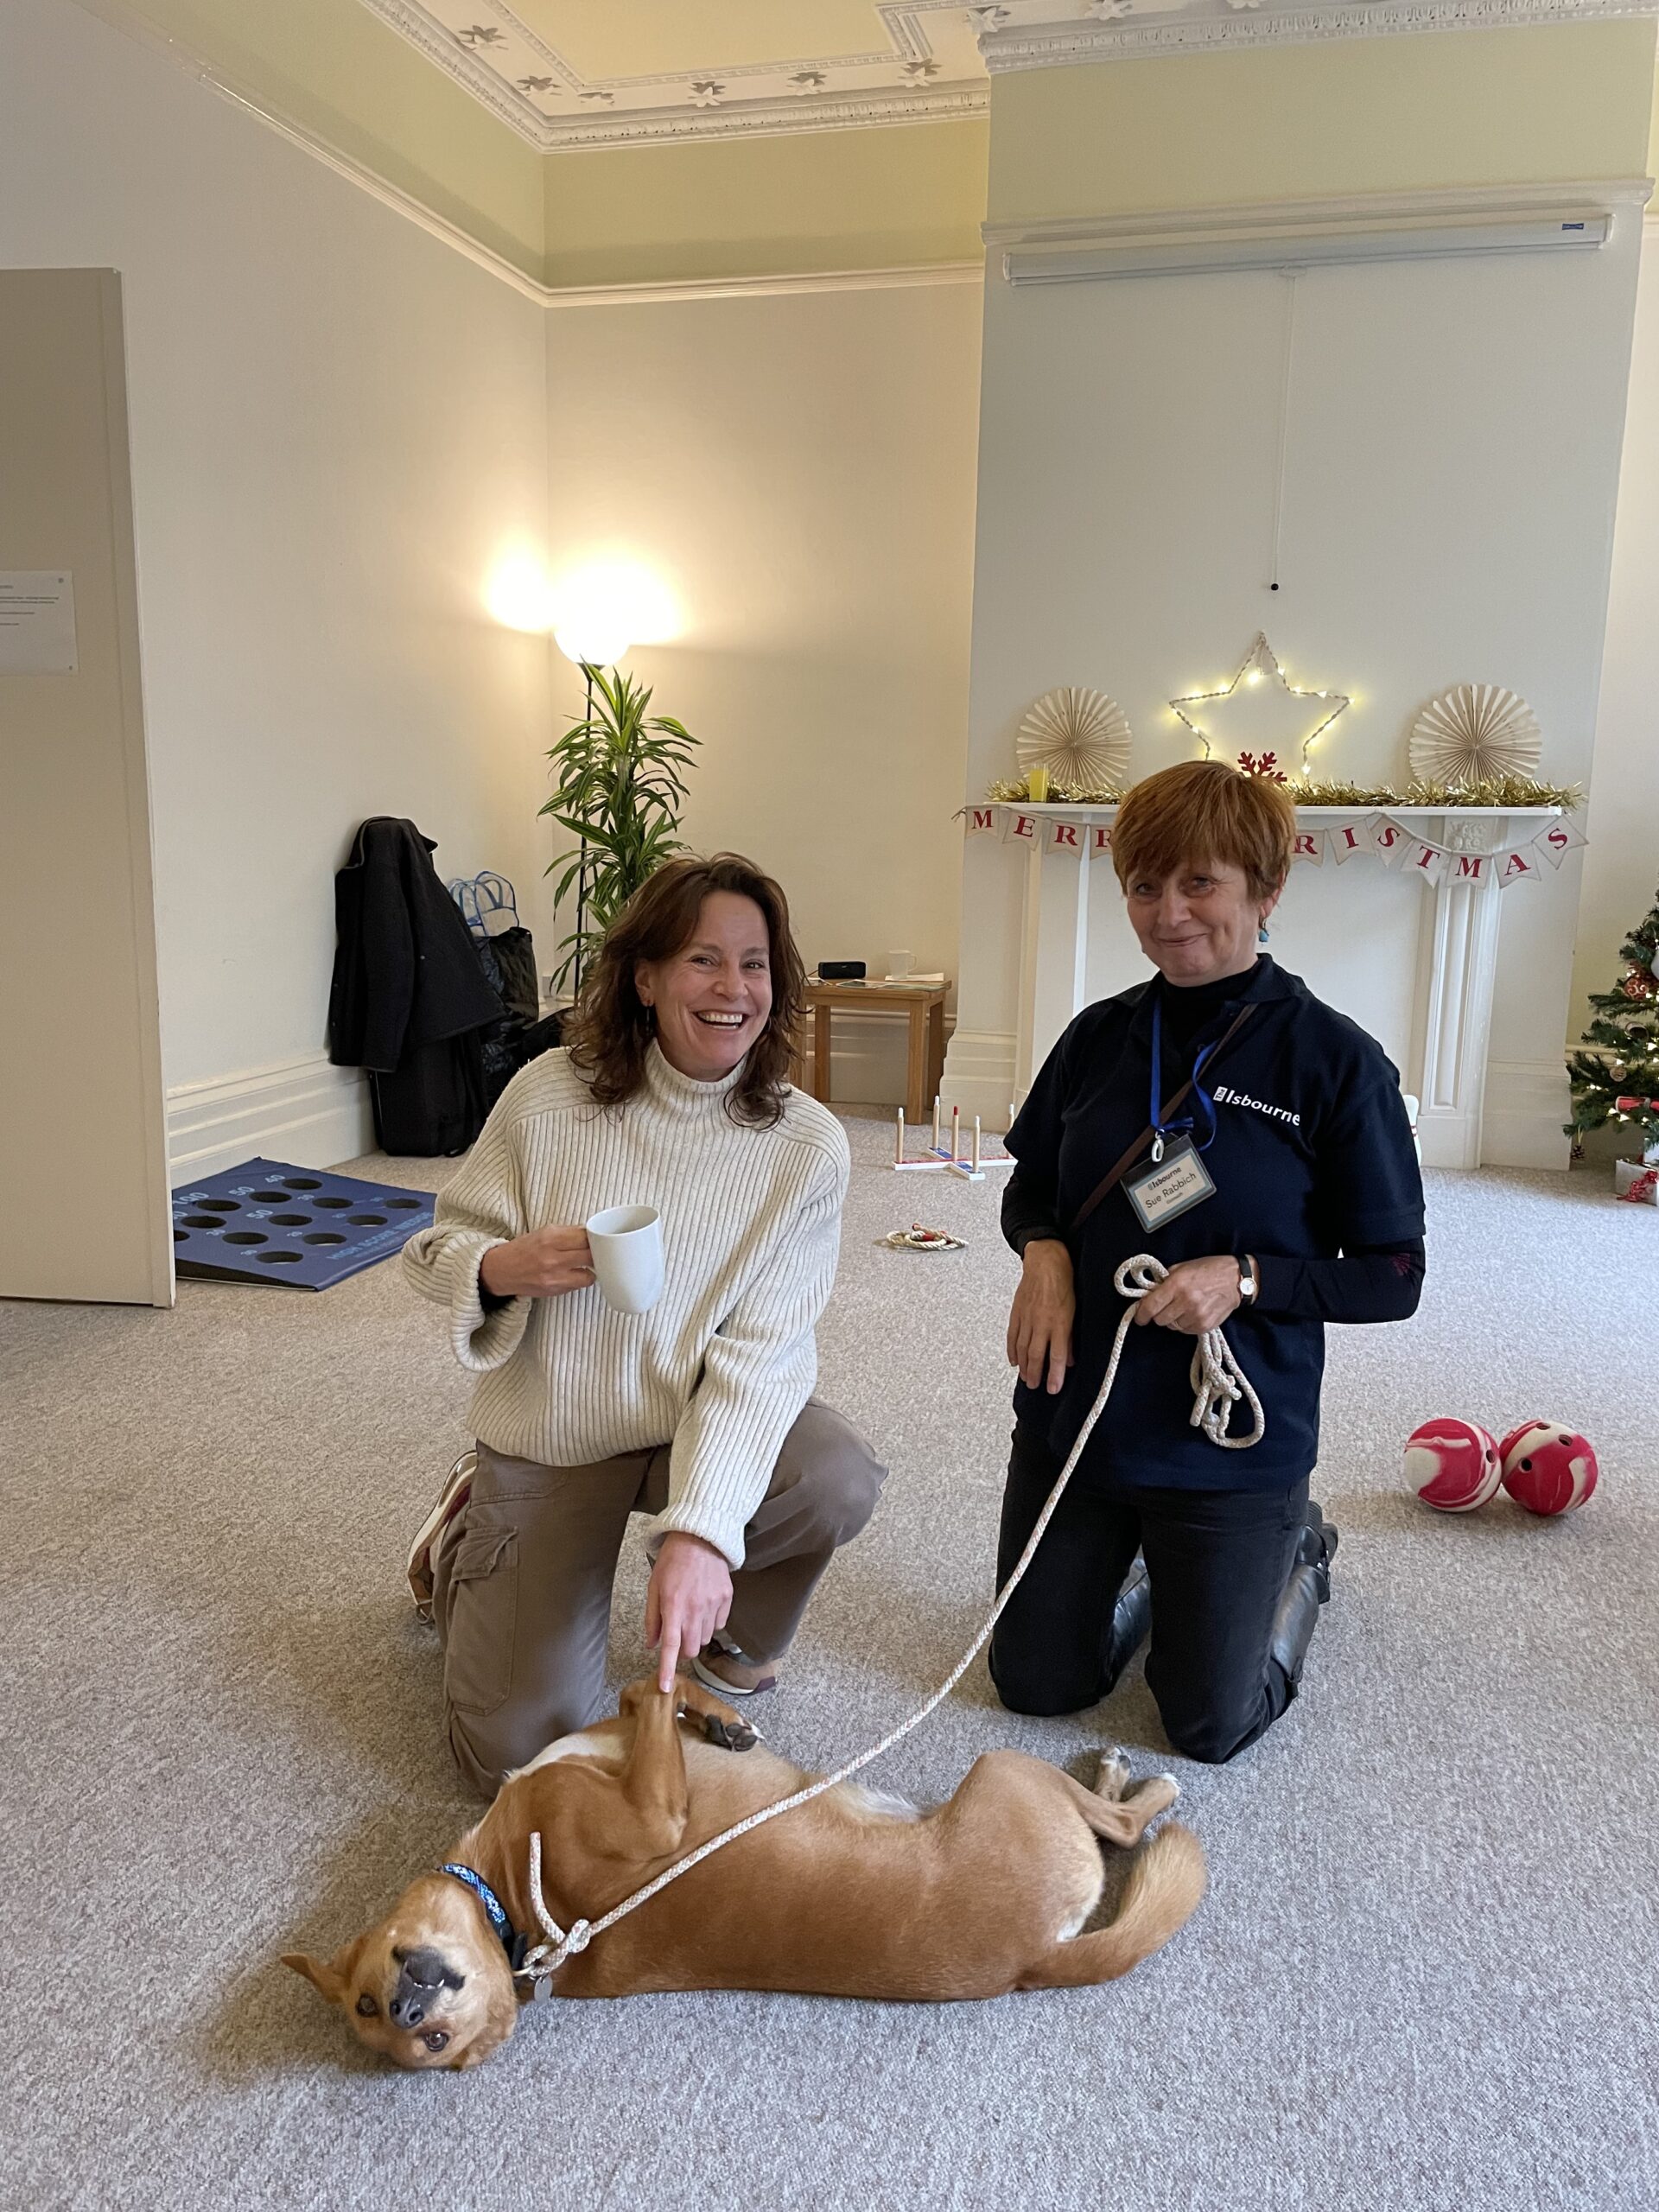 Two community wellbeing tutors knelt on the floor with the pets as therapy dog.